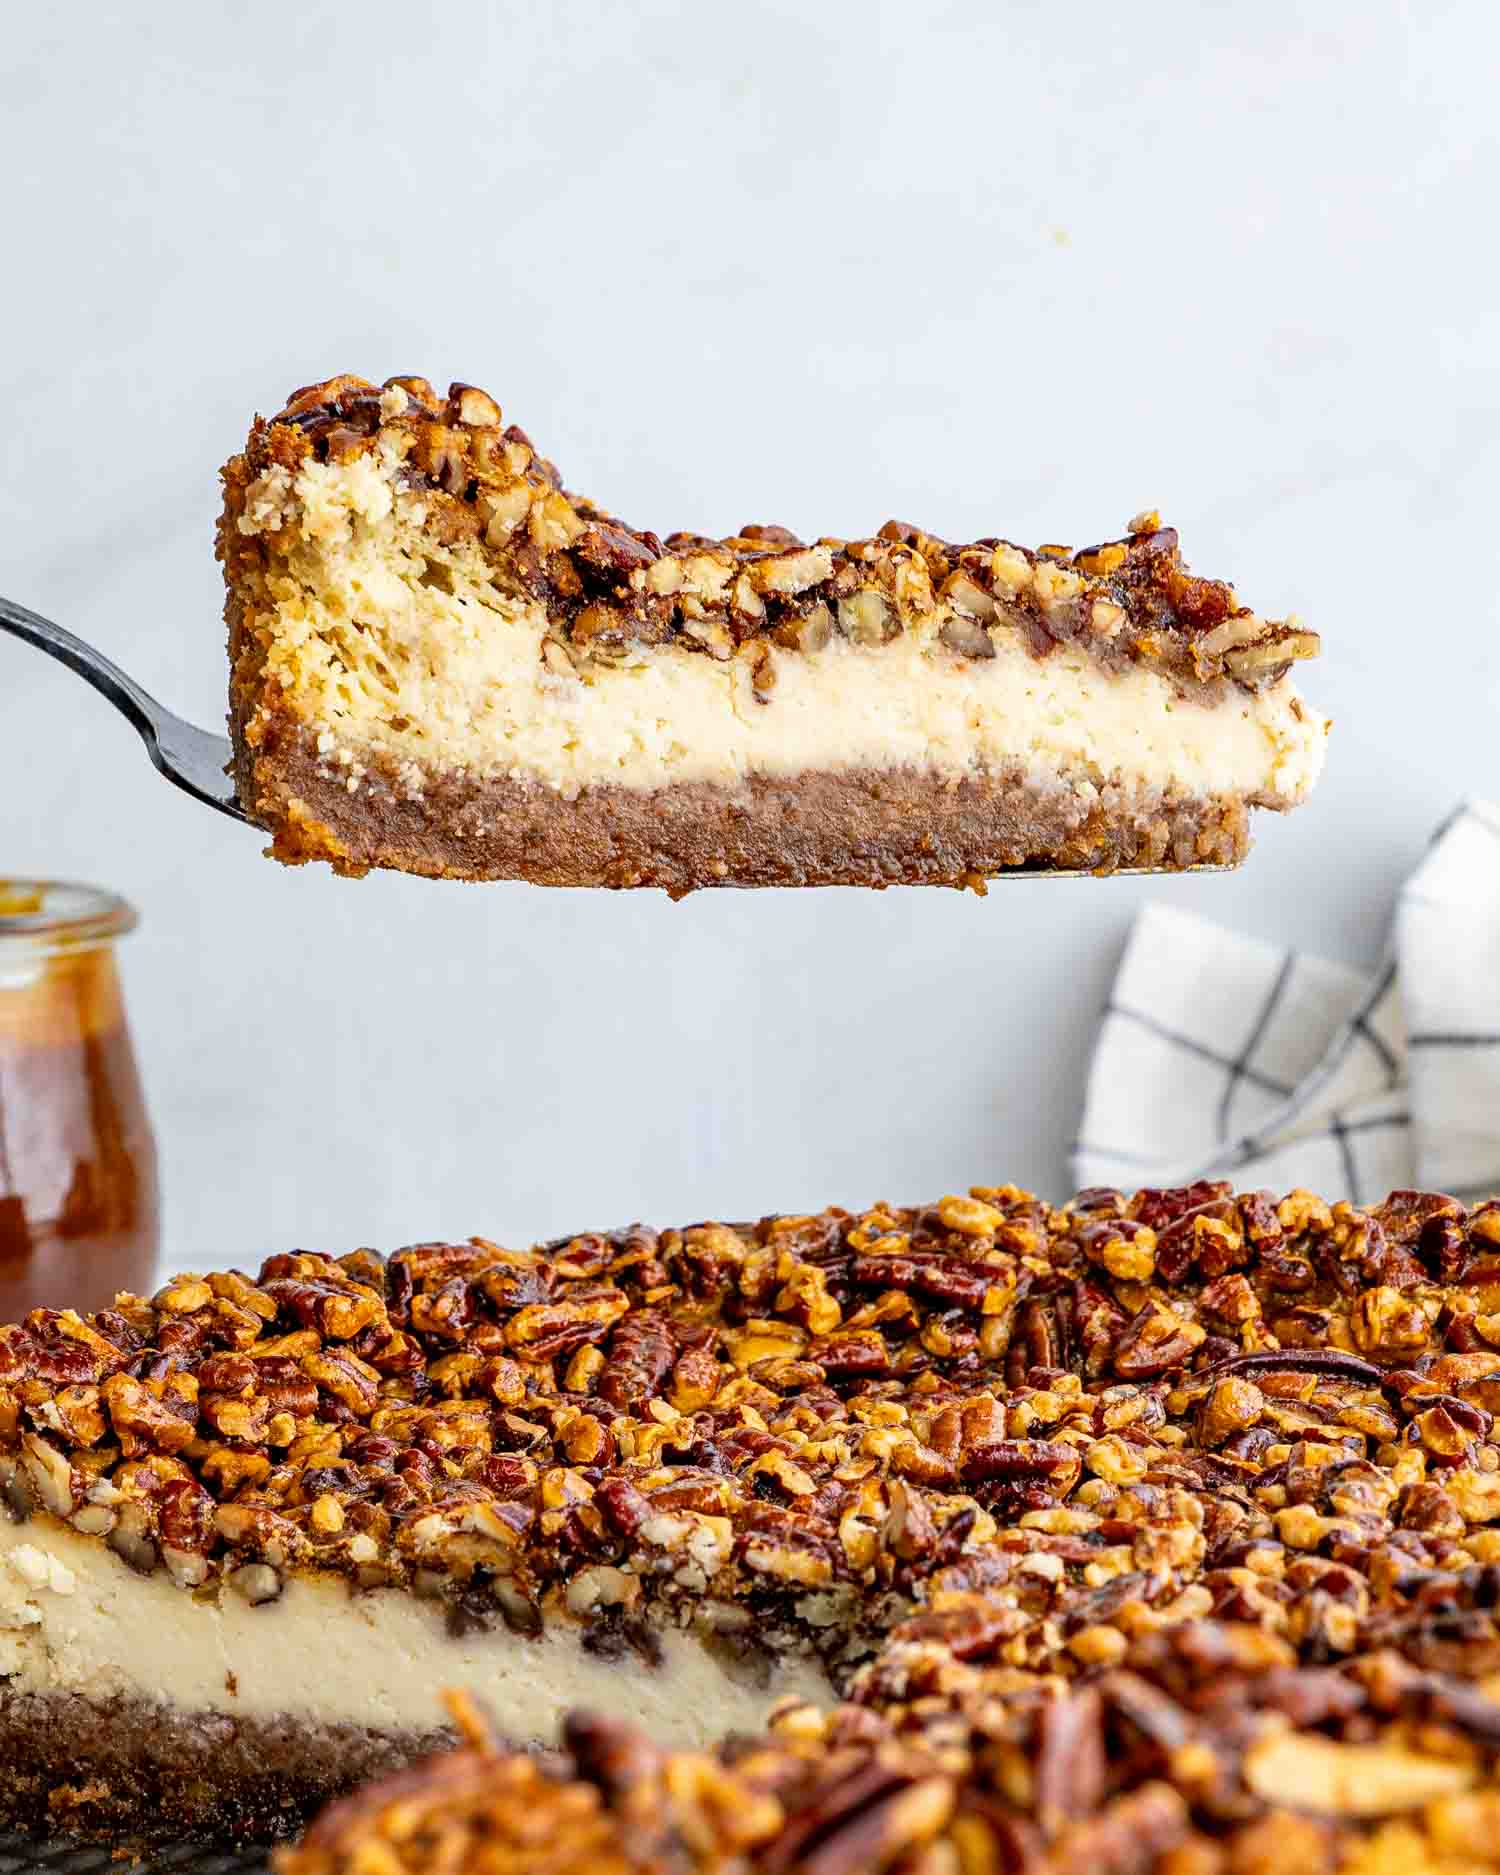 A delectable slice of Pecan Pie Cheesecake being lifted by a spatula, showcasing its creamy cheesecake layer and crunchy pecan topping, set against the backdrop of the whole cheesecake.